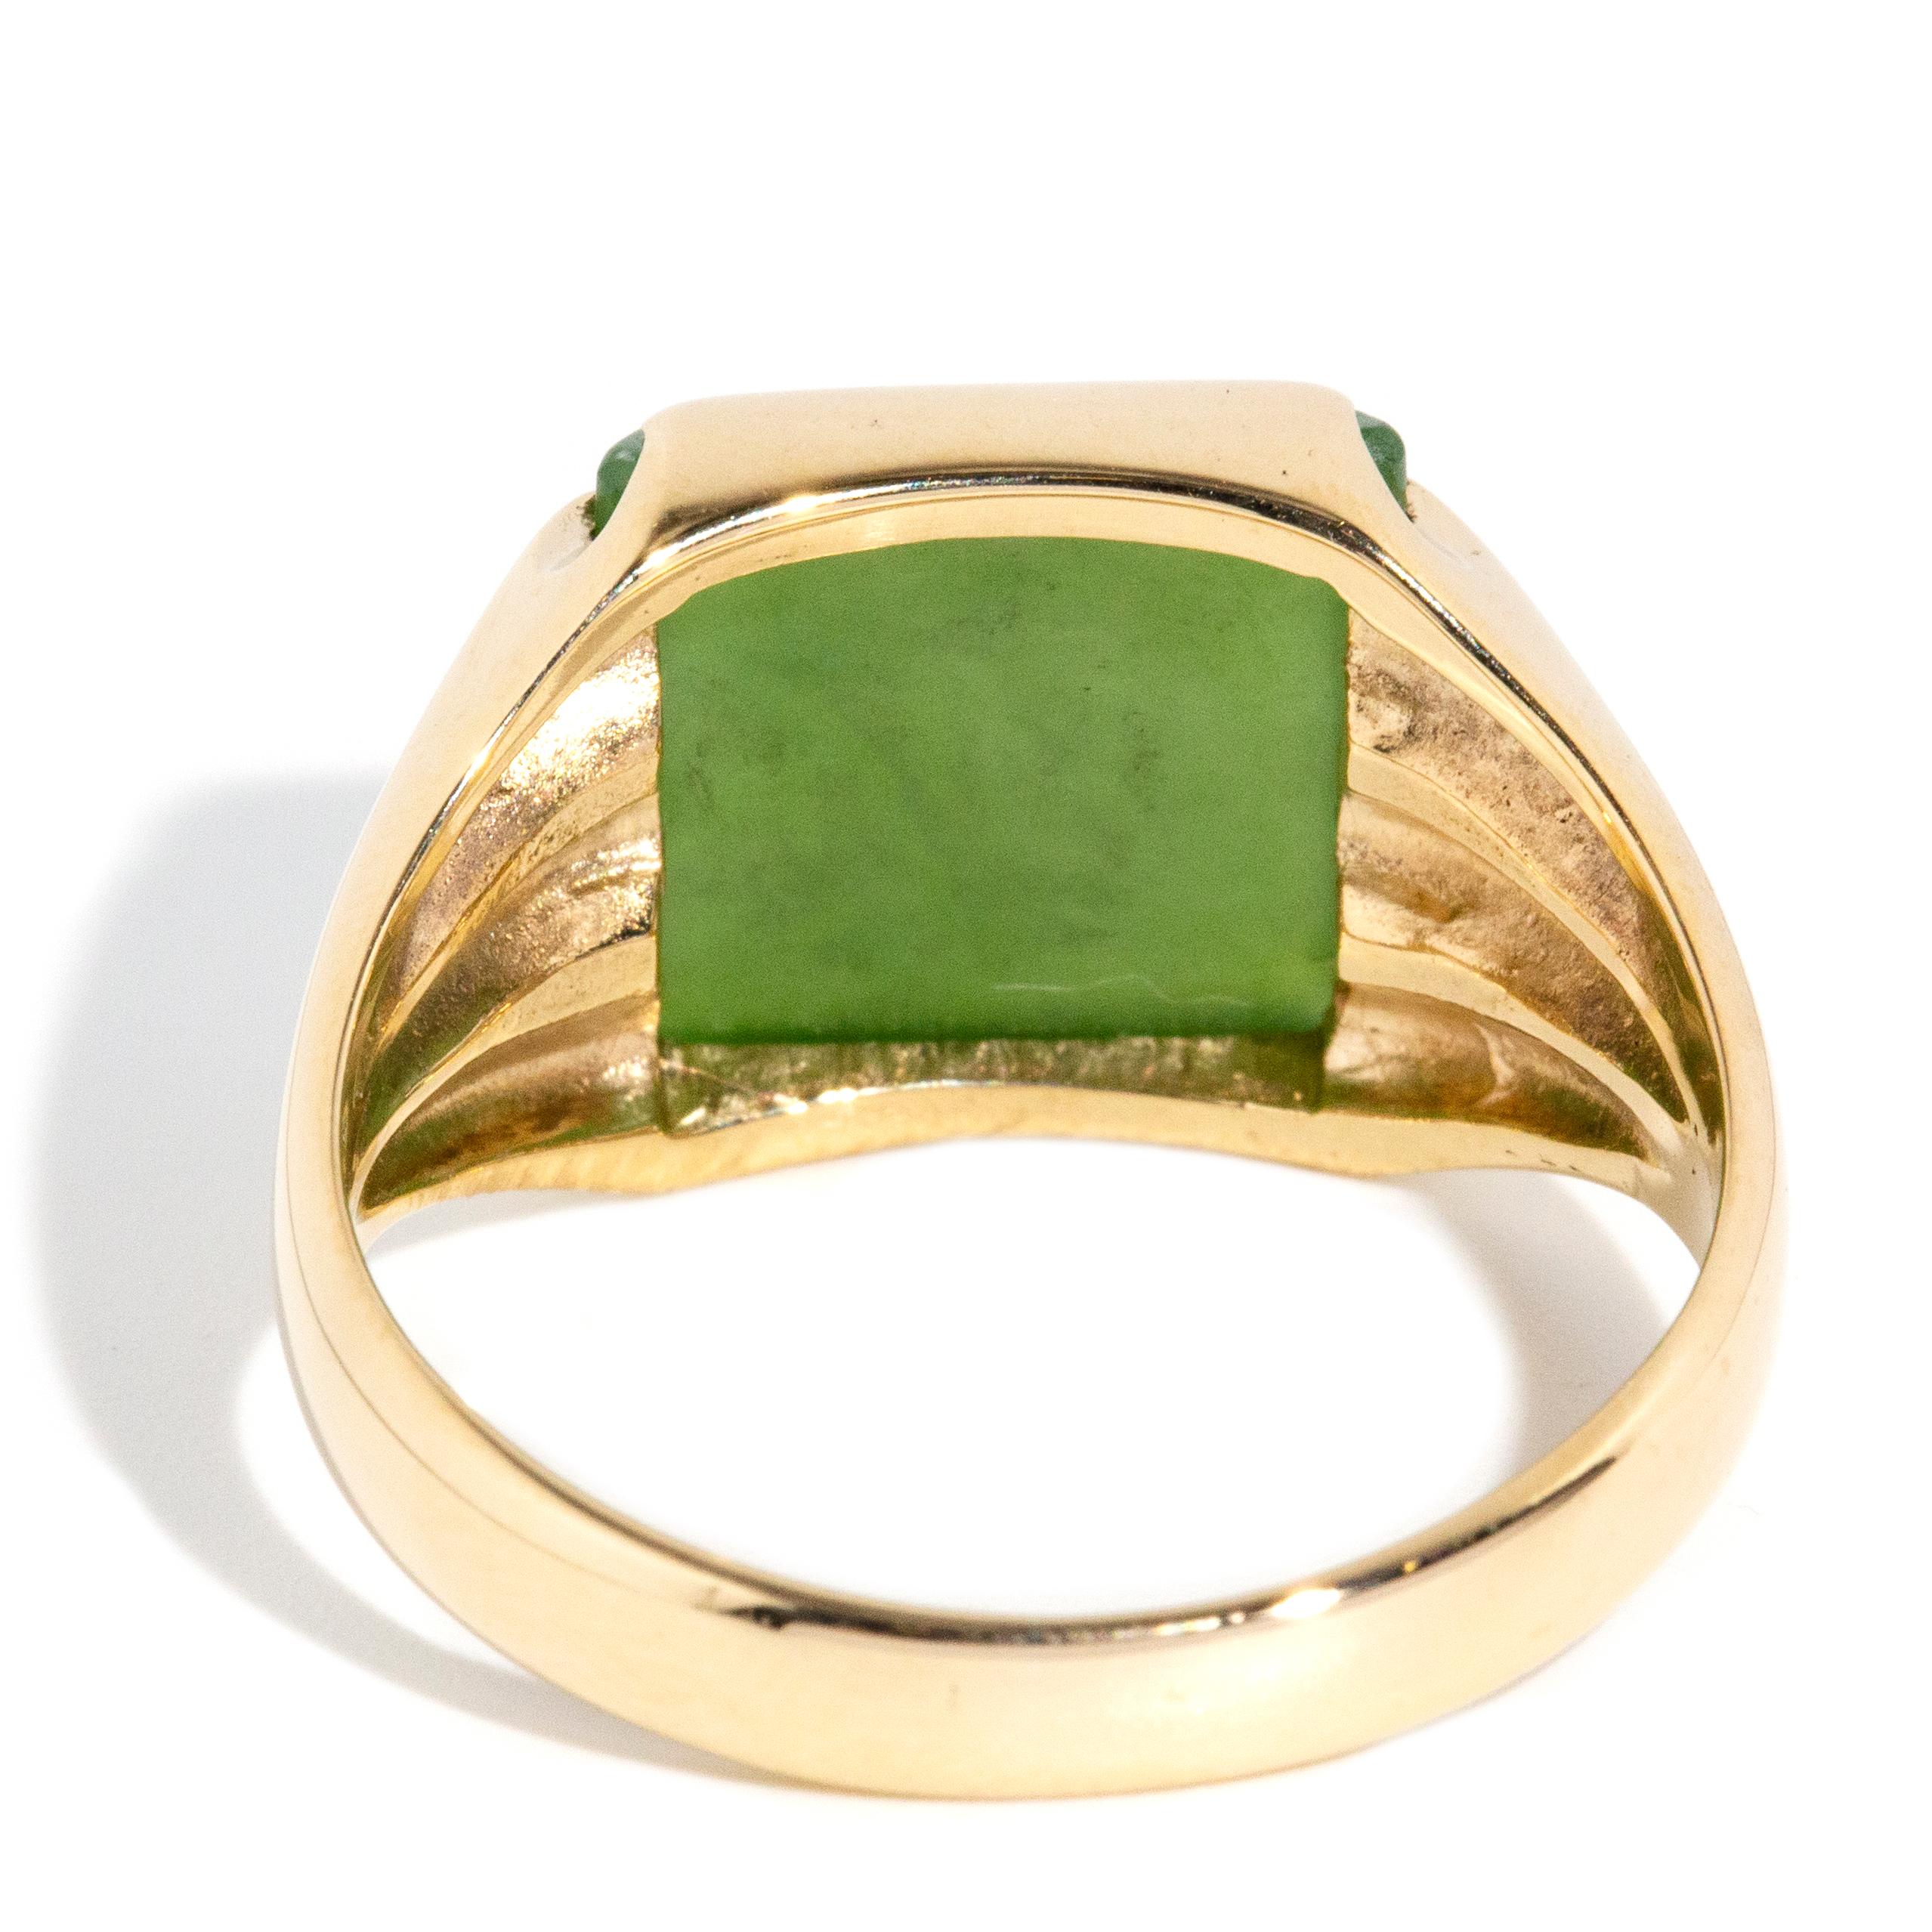 Women's Vintage Circa 1970s Square Nephrite Jade 9 Carat Yellow Gold Grooved Ring